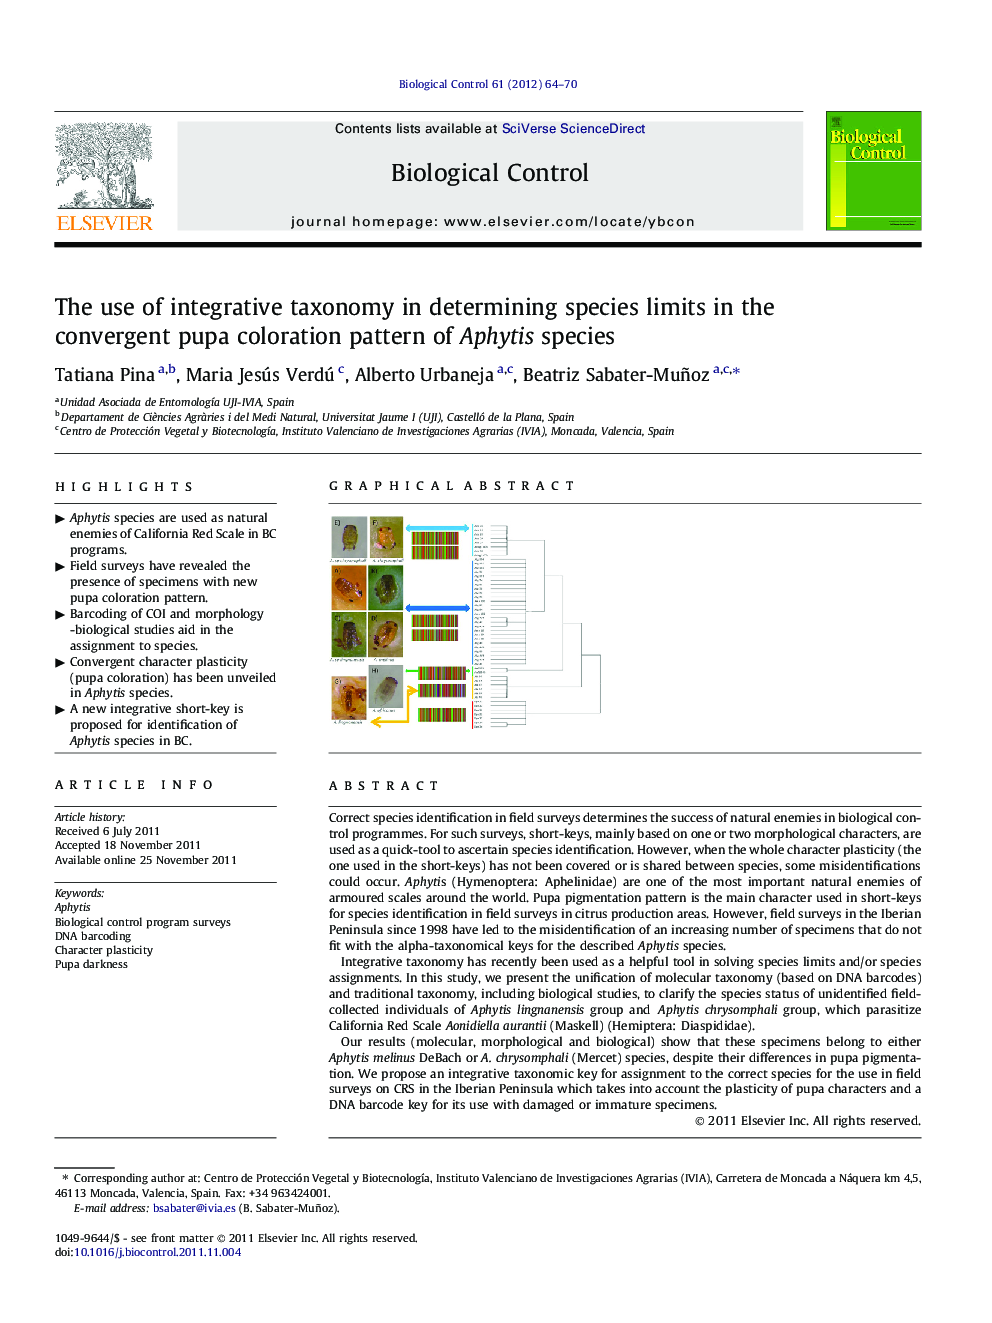 The use of integrative taxonomy in determining species limits in the convergent pupa coloration pattern of Aphytis species